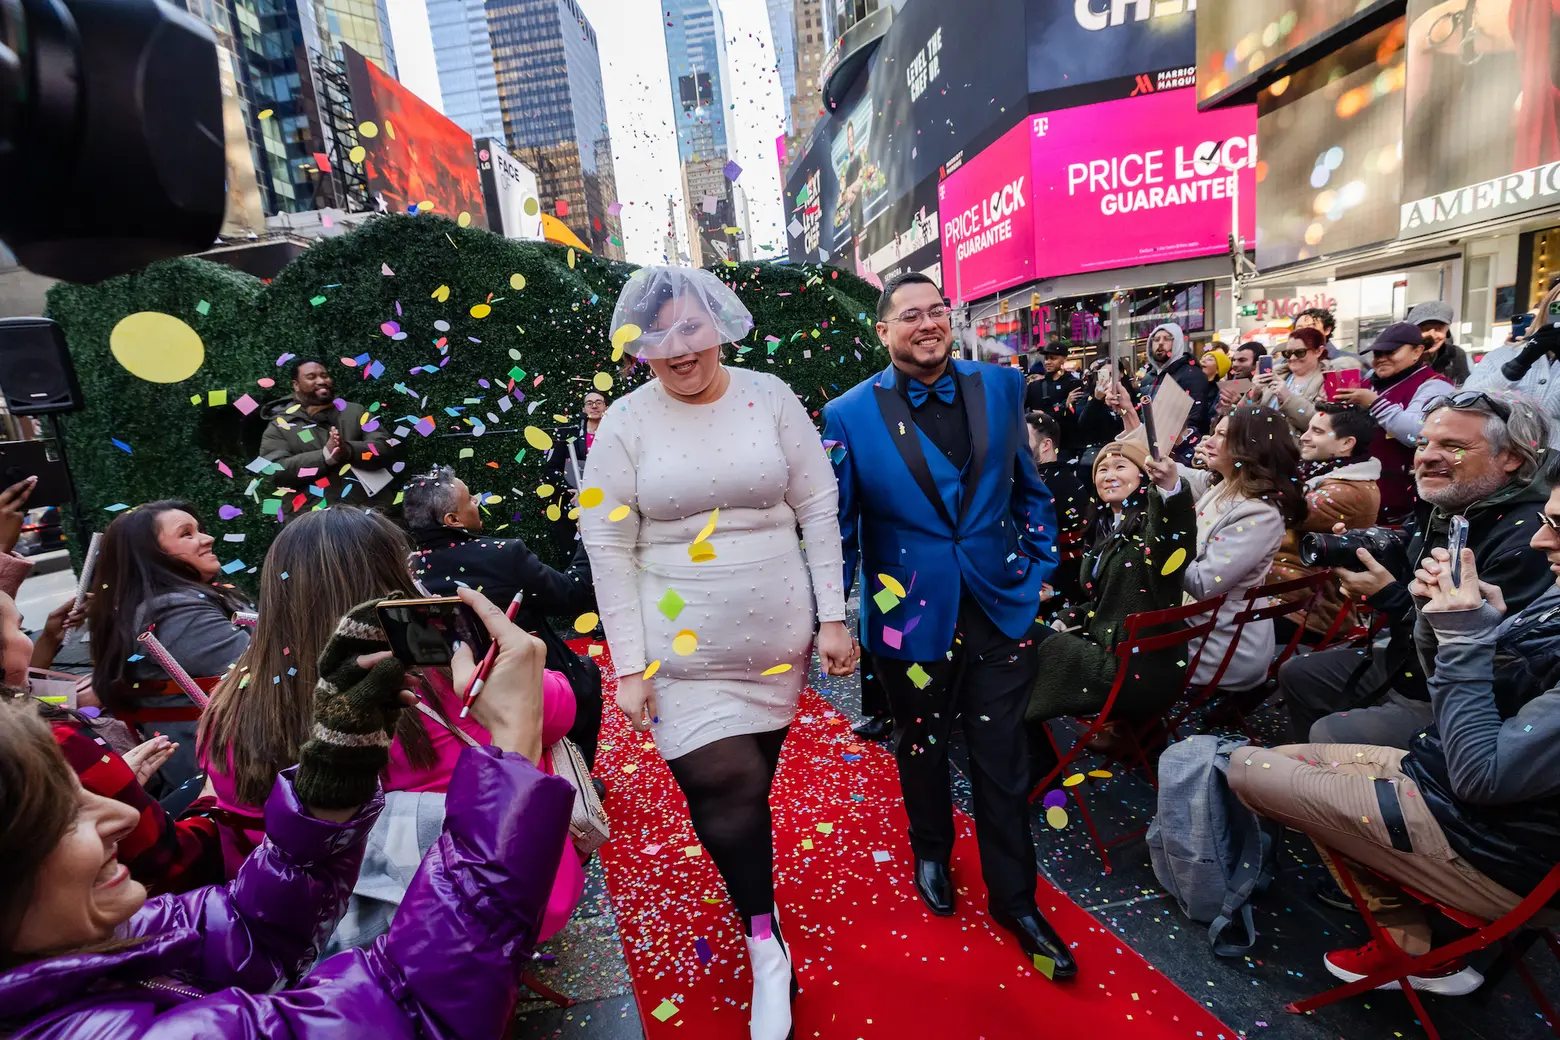 You can get married in Times Square this Valentine’s Day